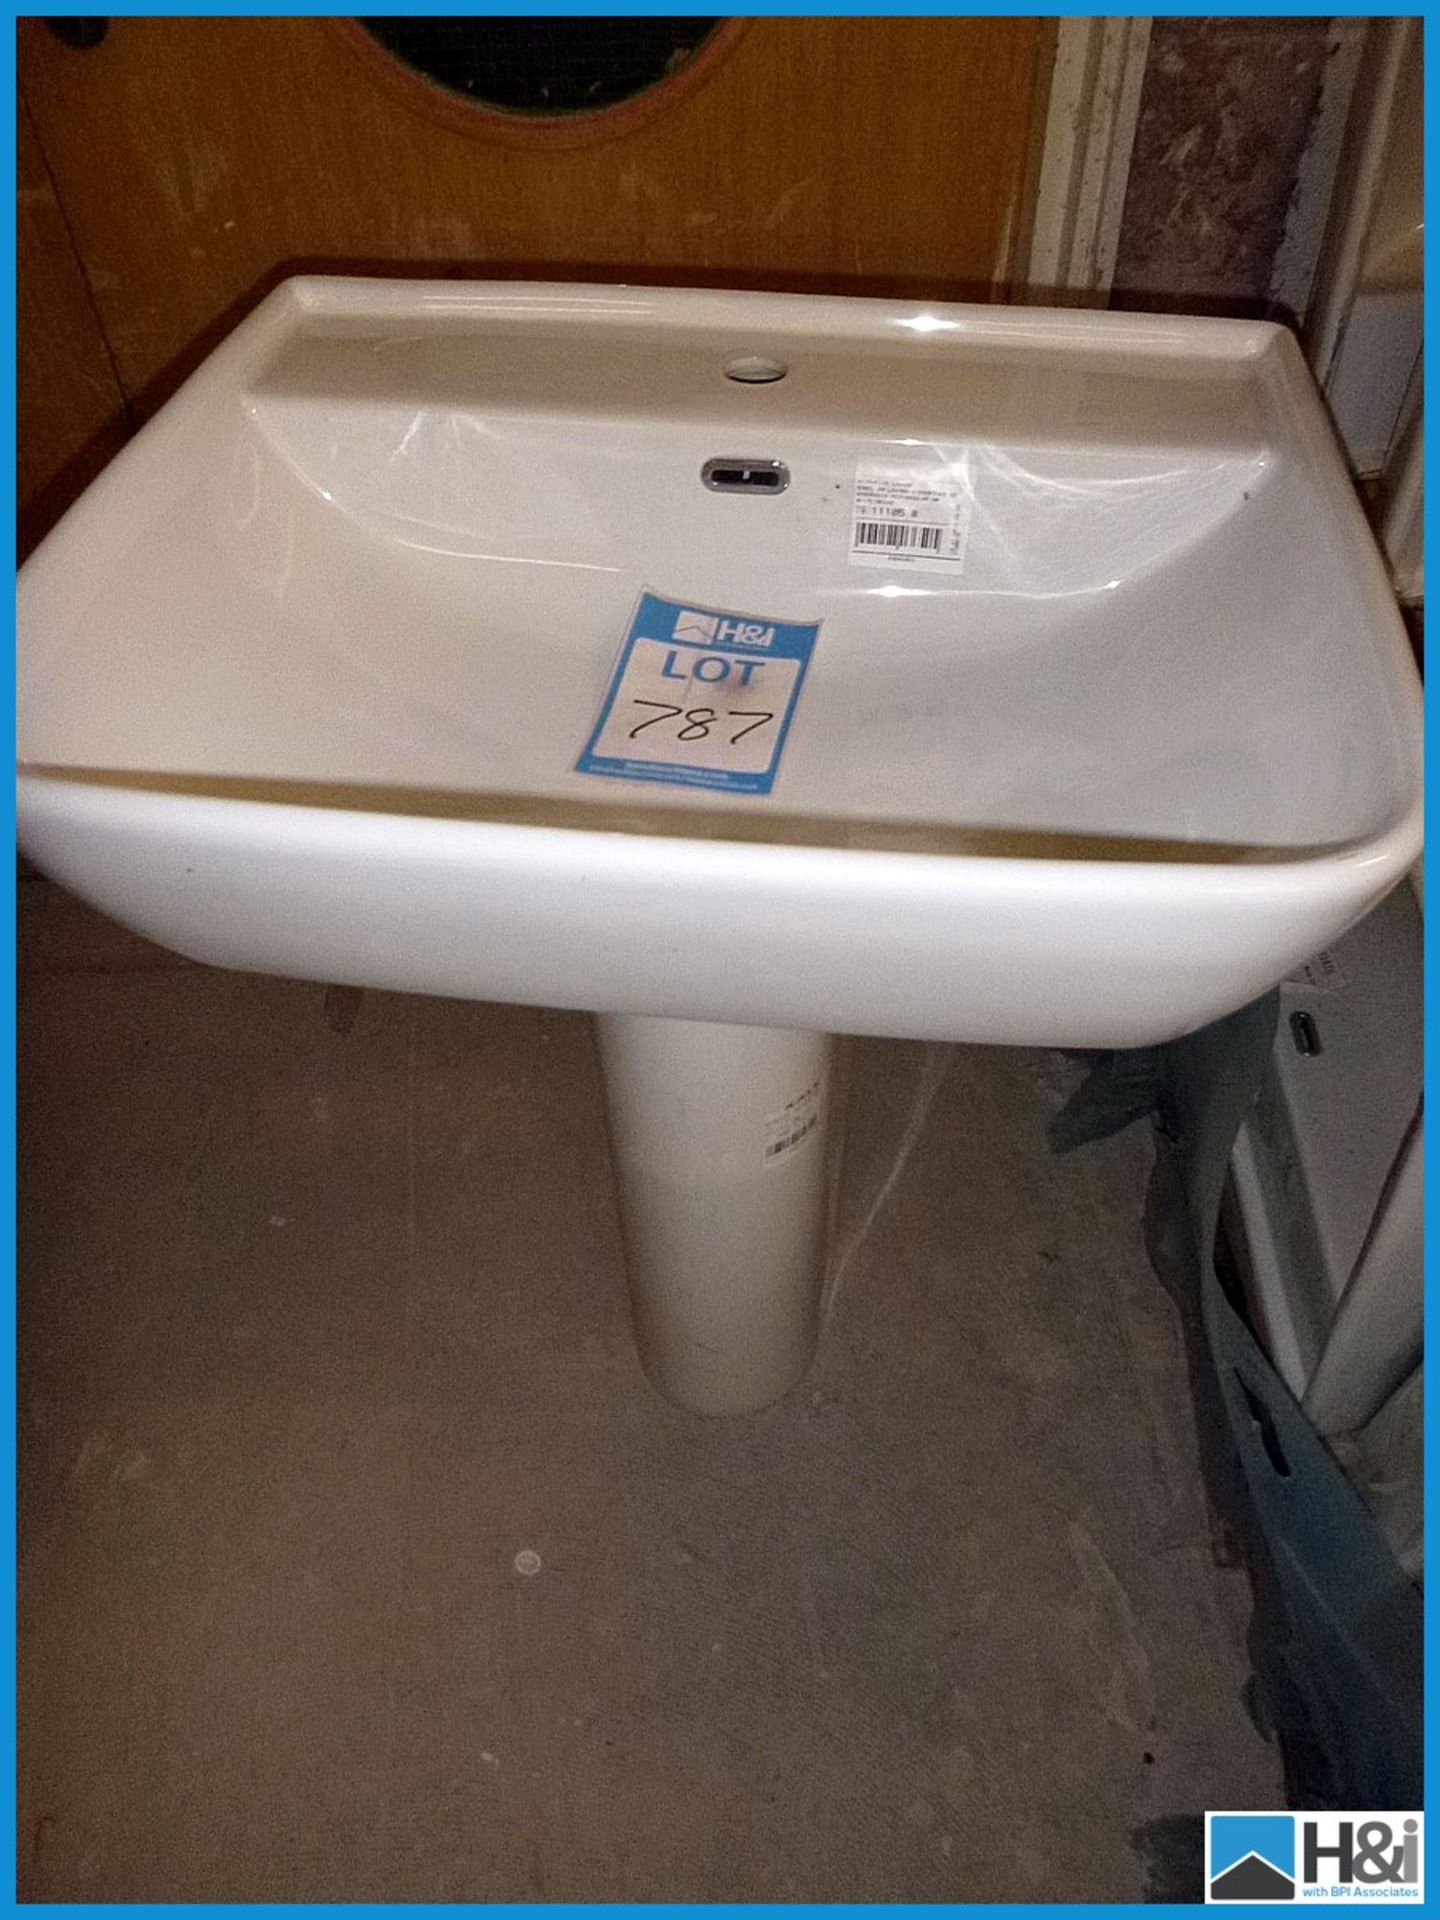 600mm x 500mm Vitra Basin & Pedestal RRP £98 Appraisal: Viewing Essential Serial No: NA Location: